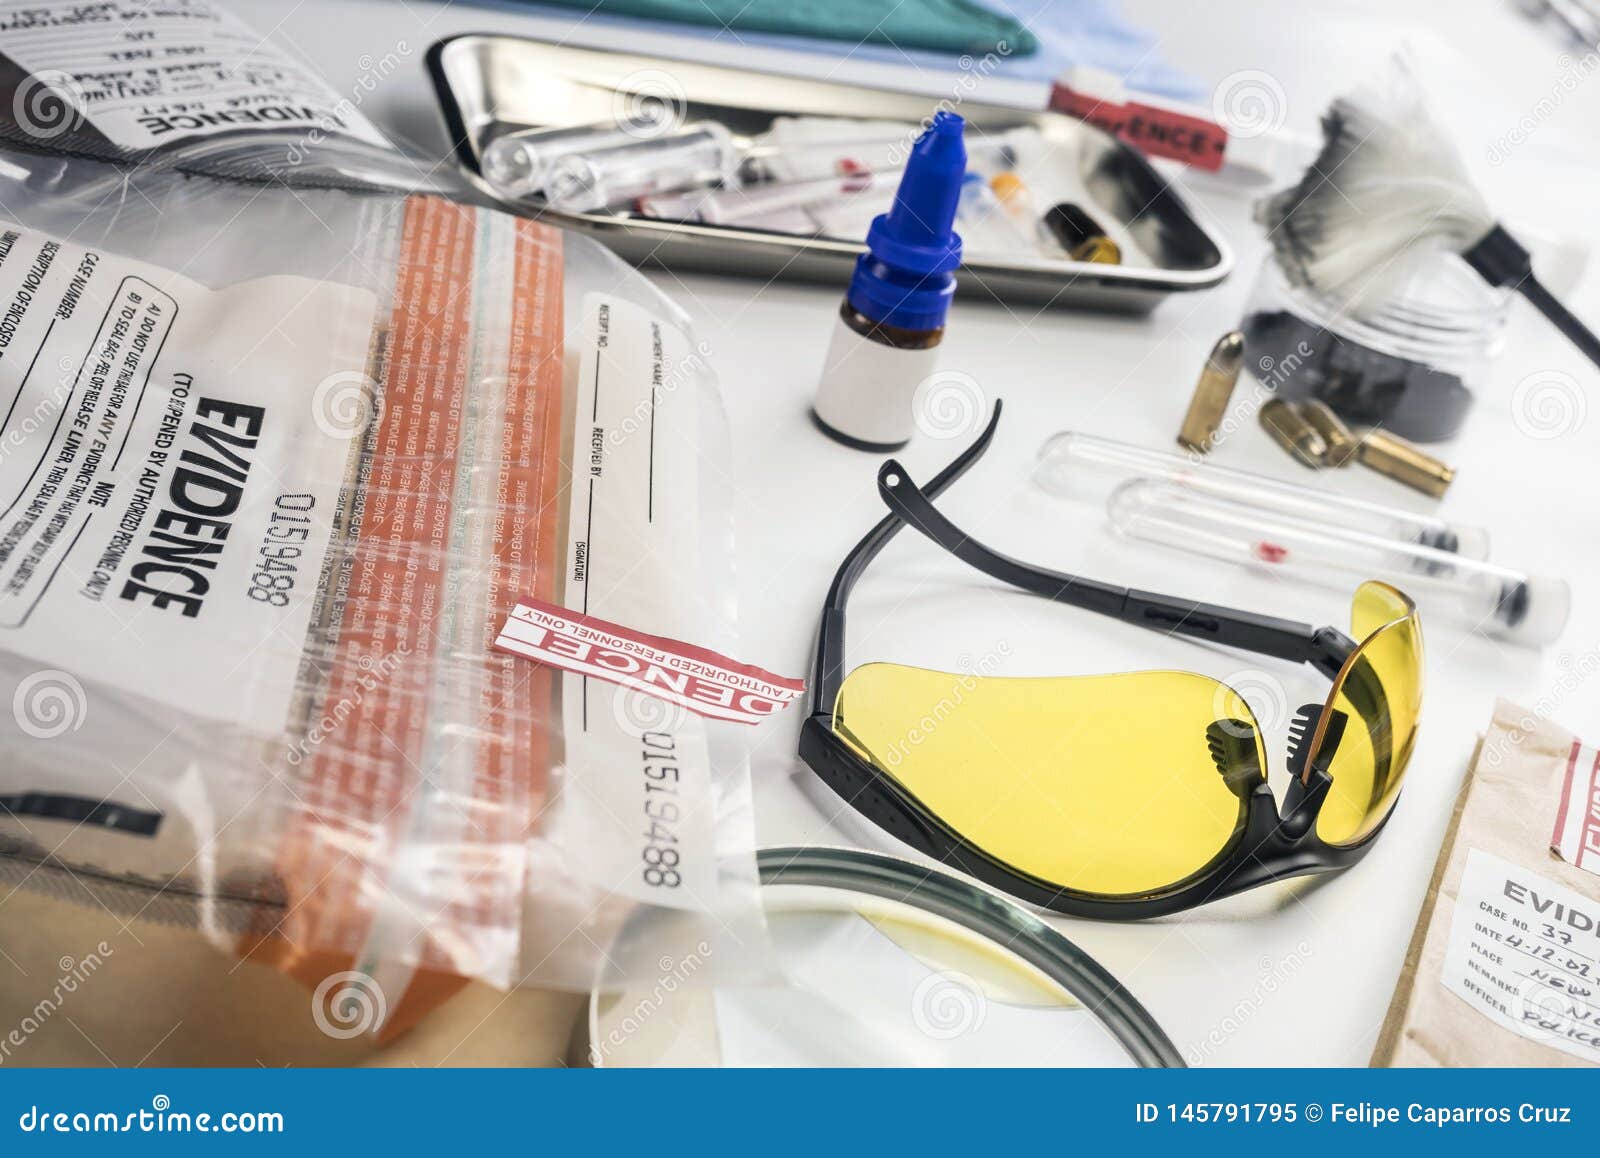 basic research utensils with a evidence bag in laboratorio forensic equipment